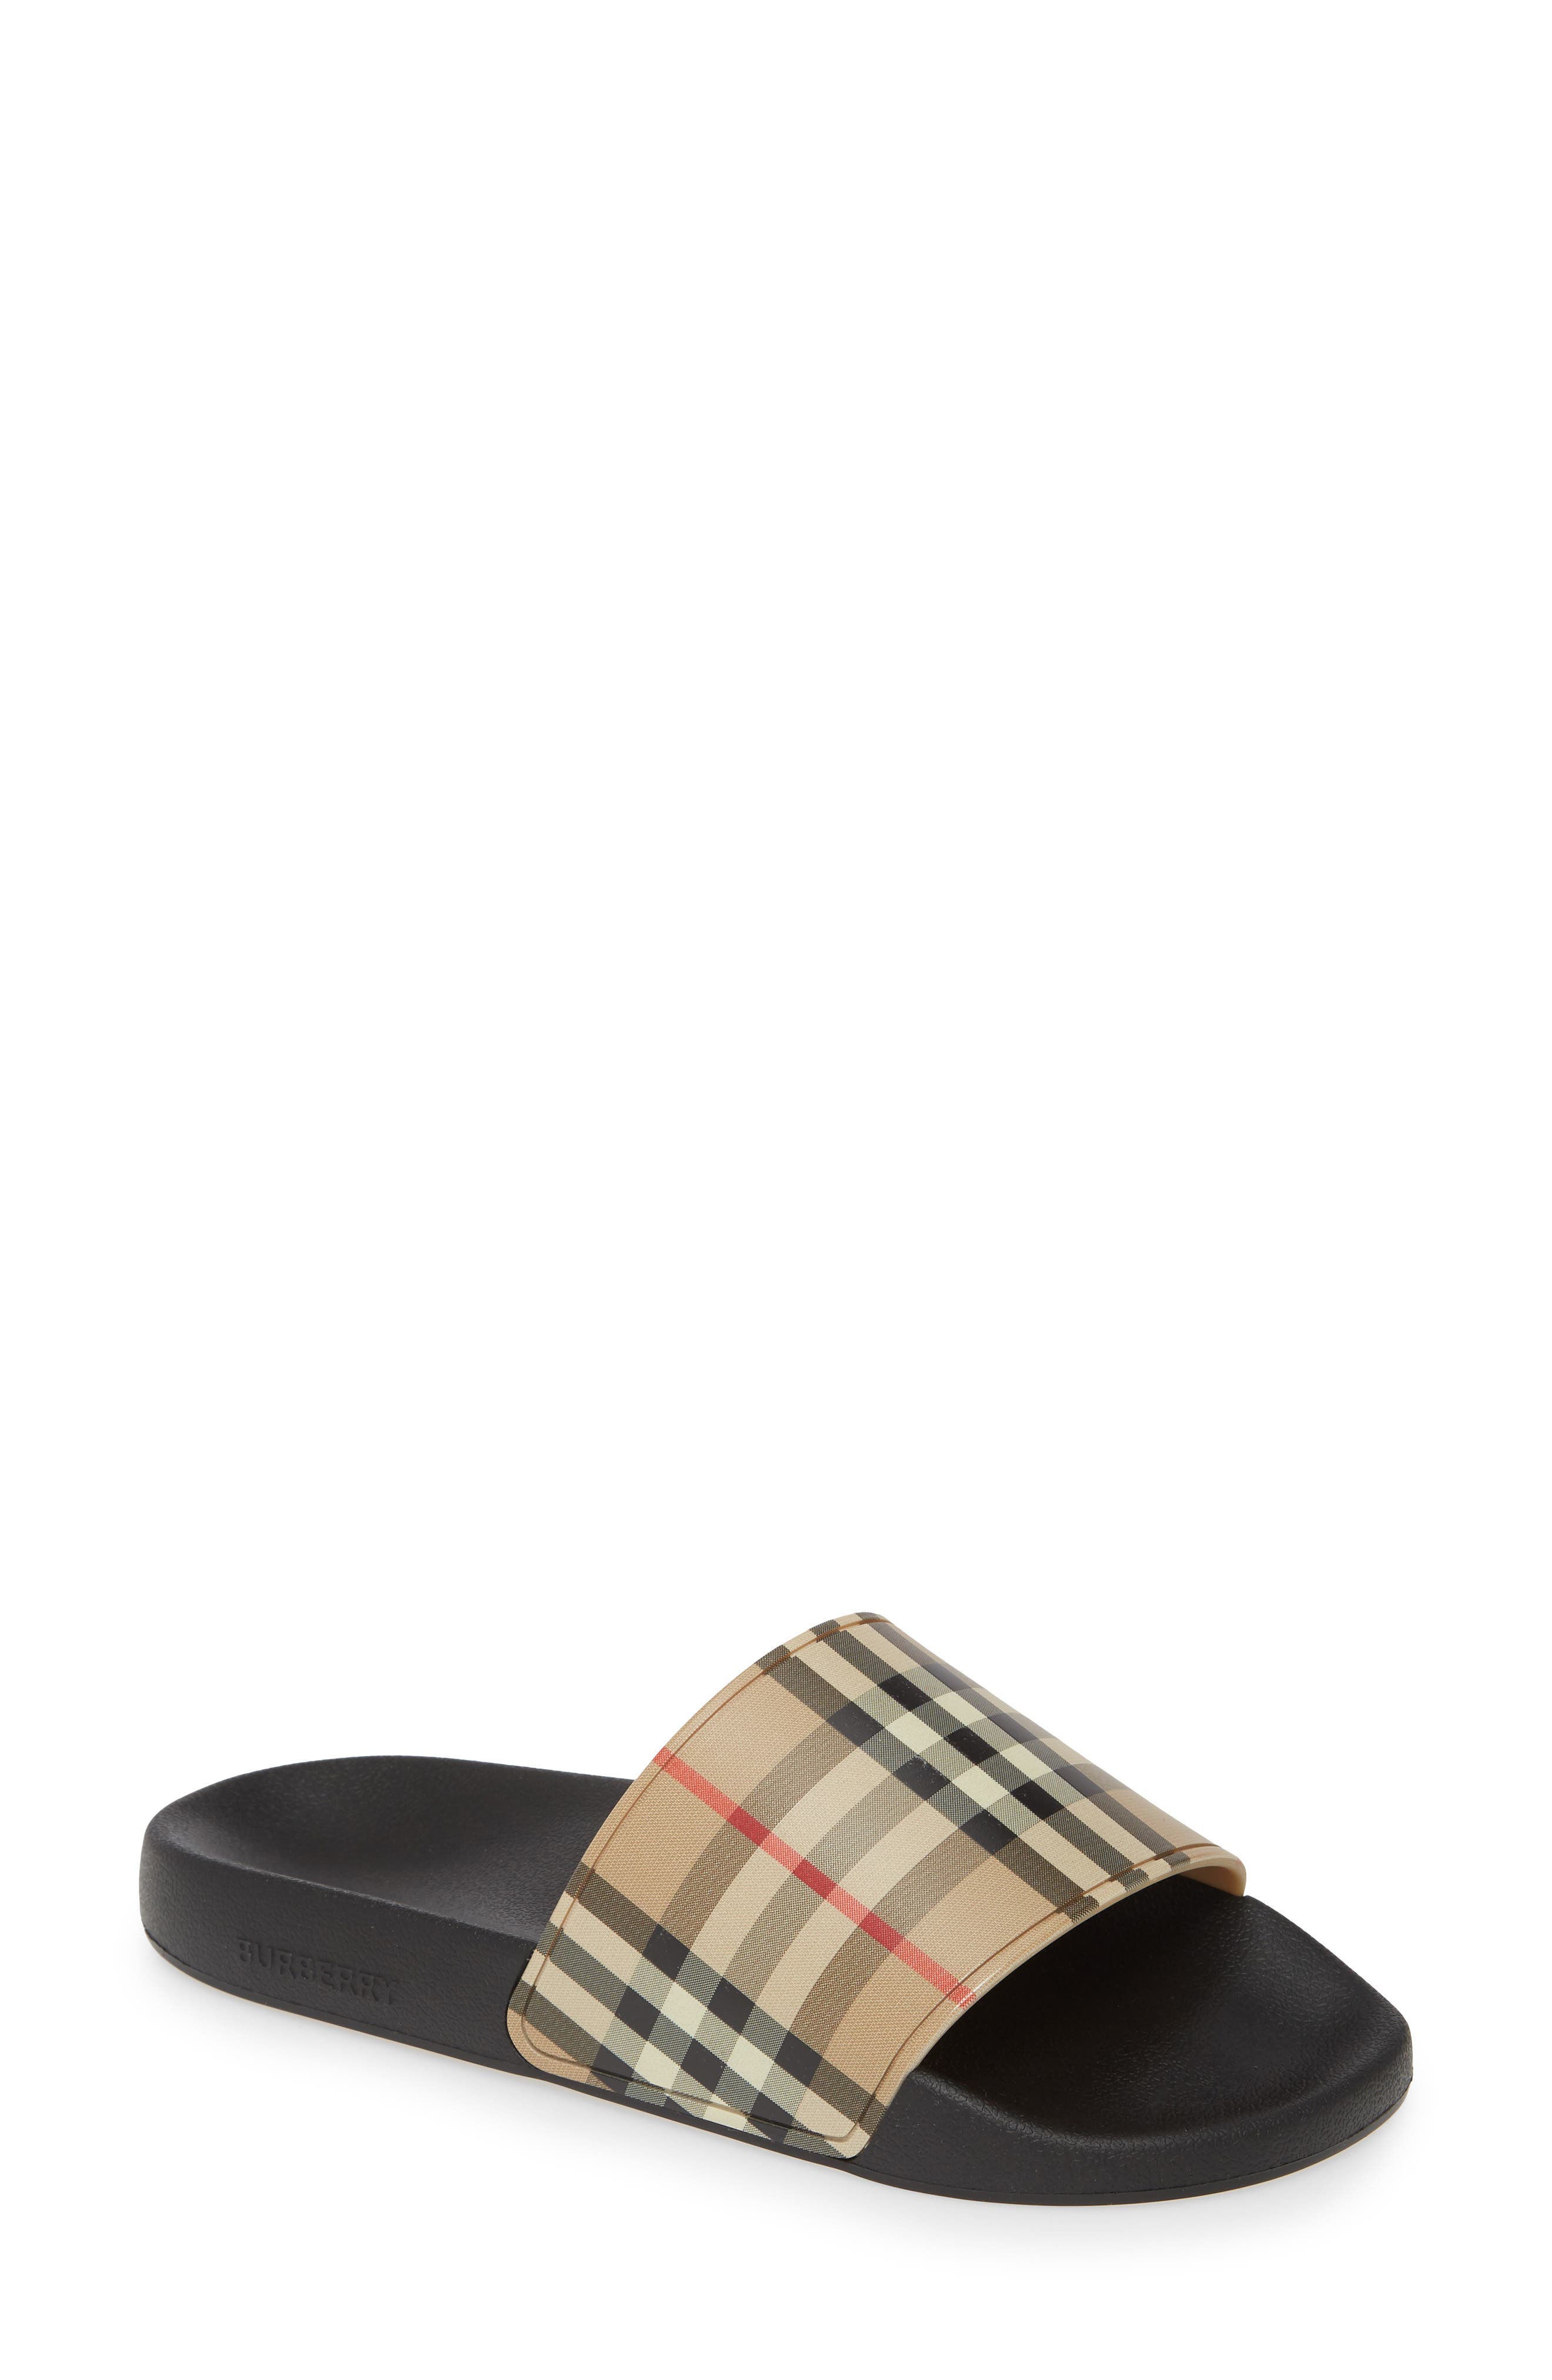 burberry shoes for women